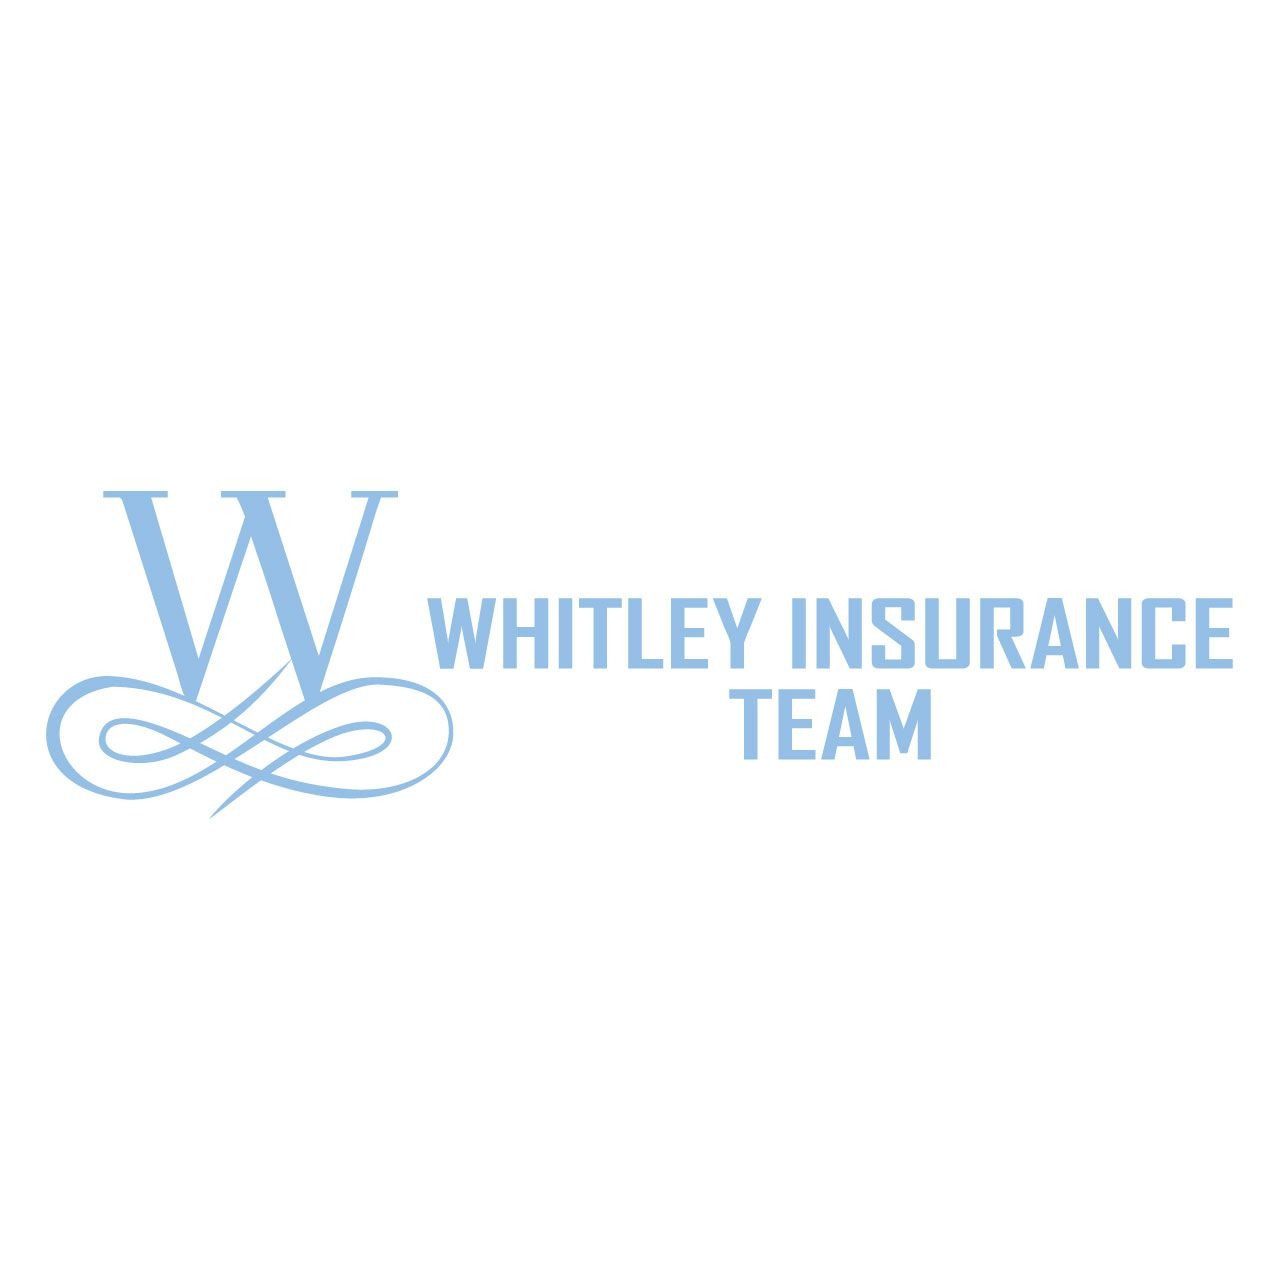 Dean Whitley, Insurance Agent